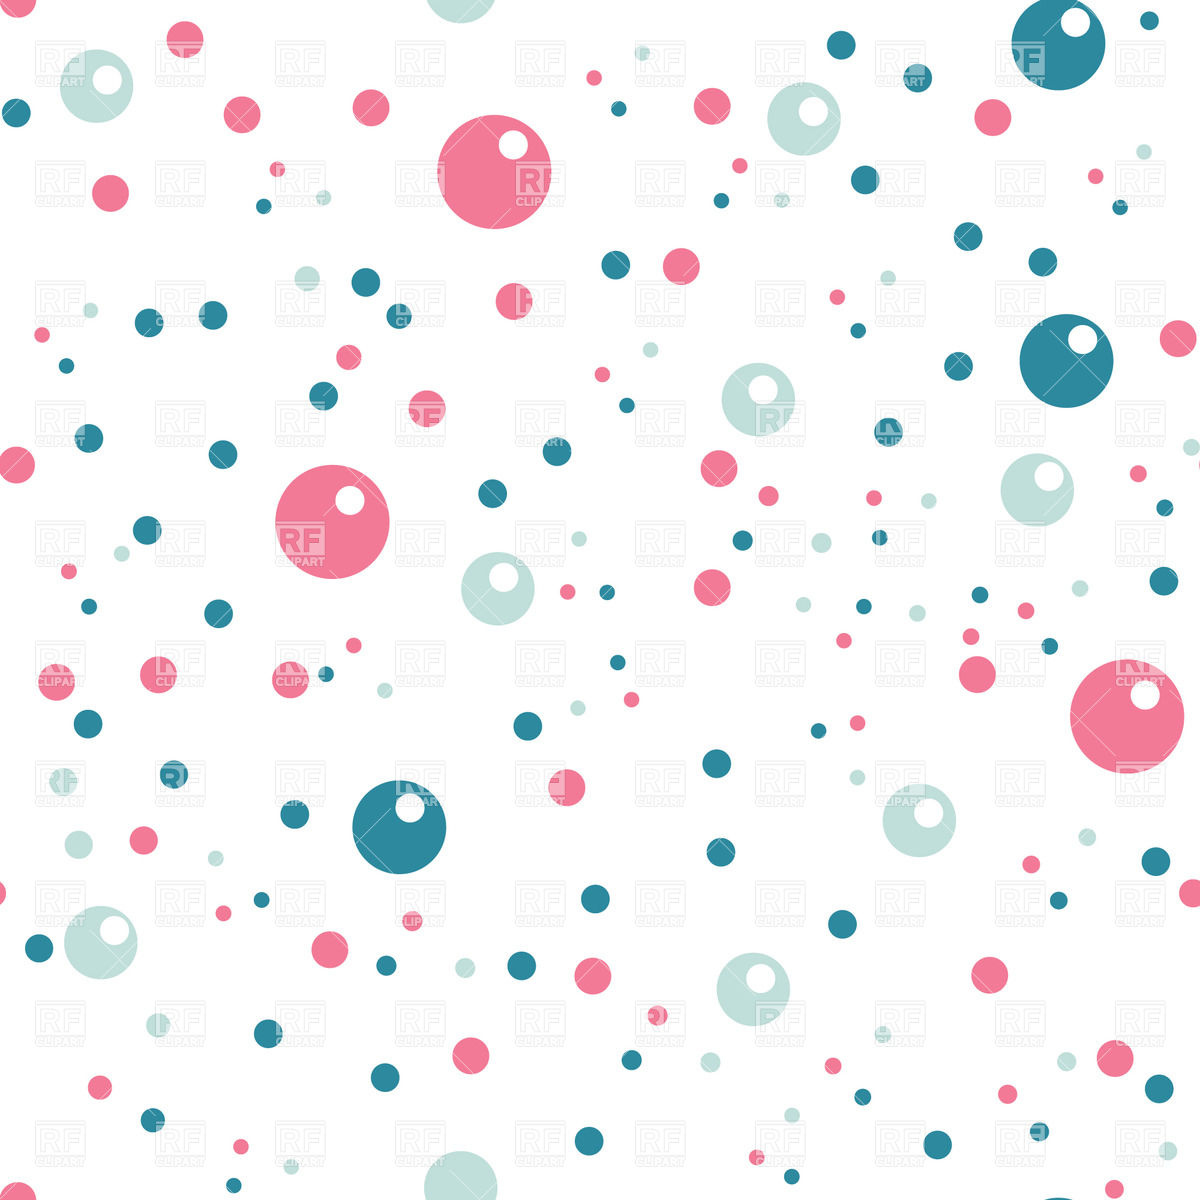 Circles   Colorful Bubbles Download Royalty Free Vector Clipart  Eps